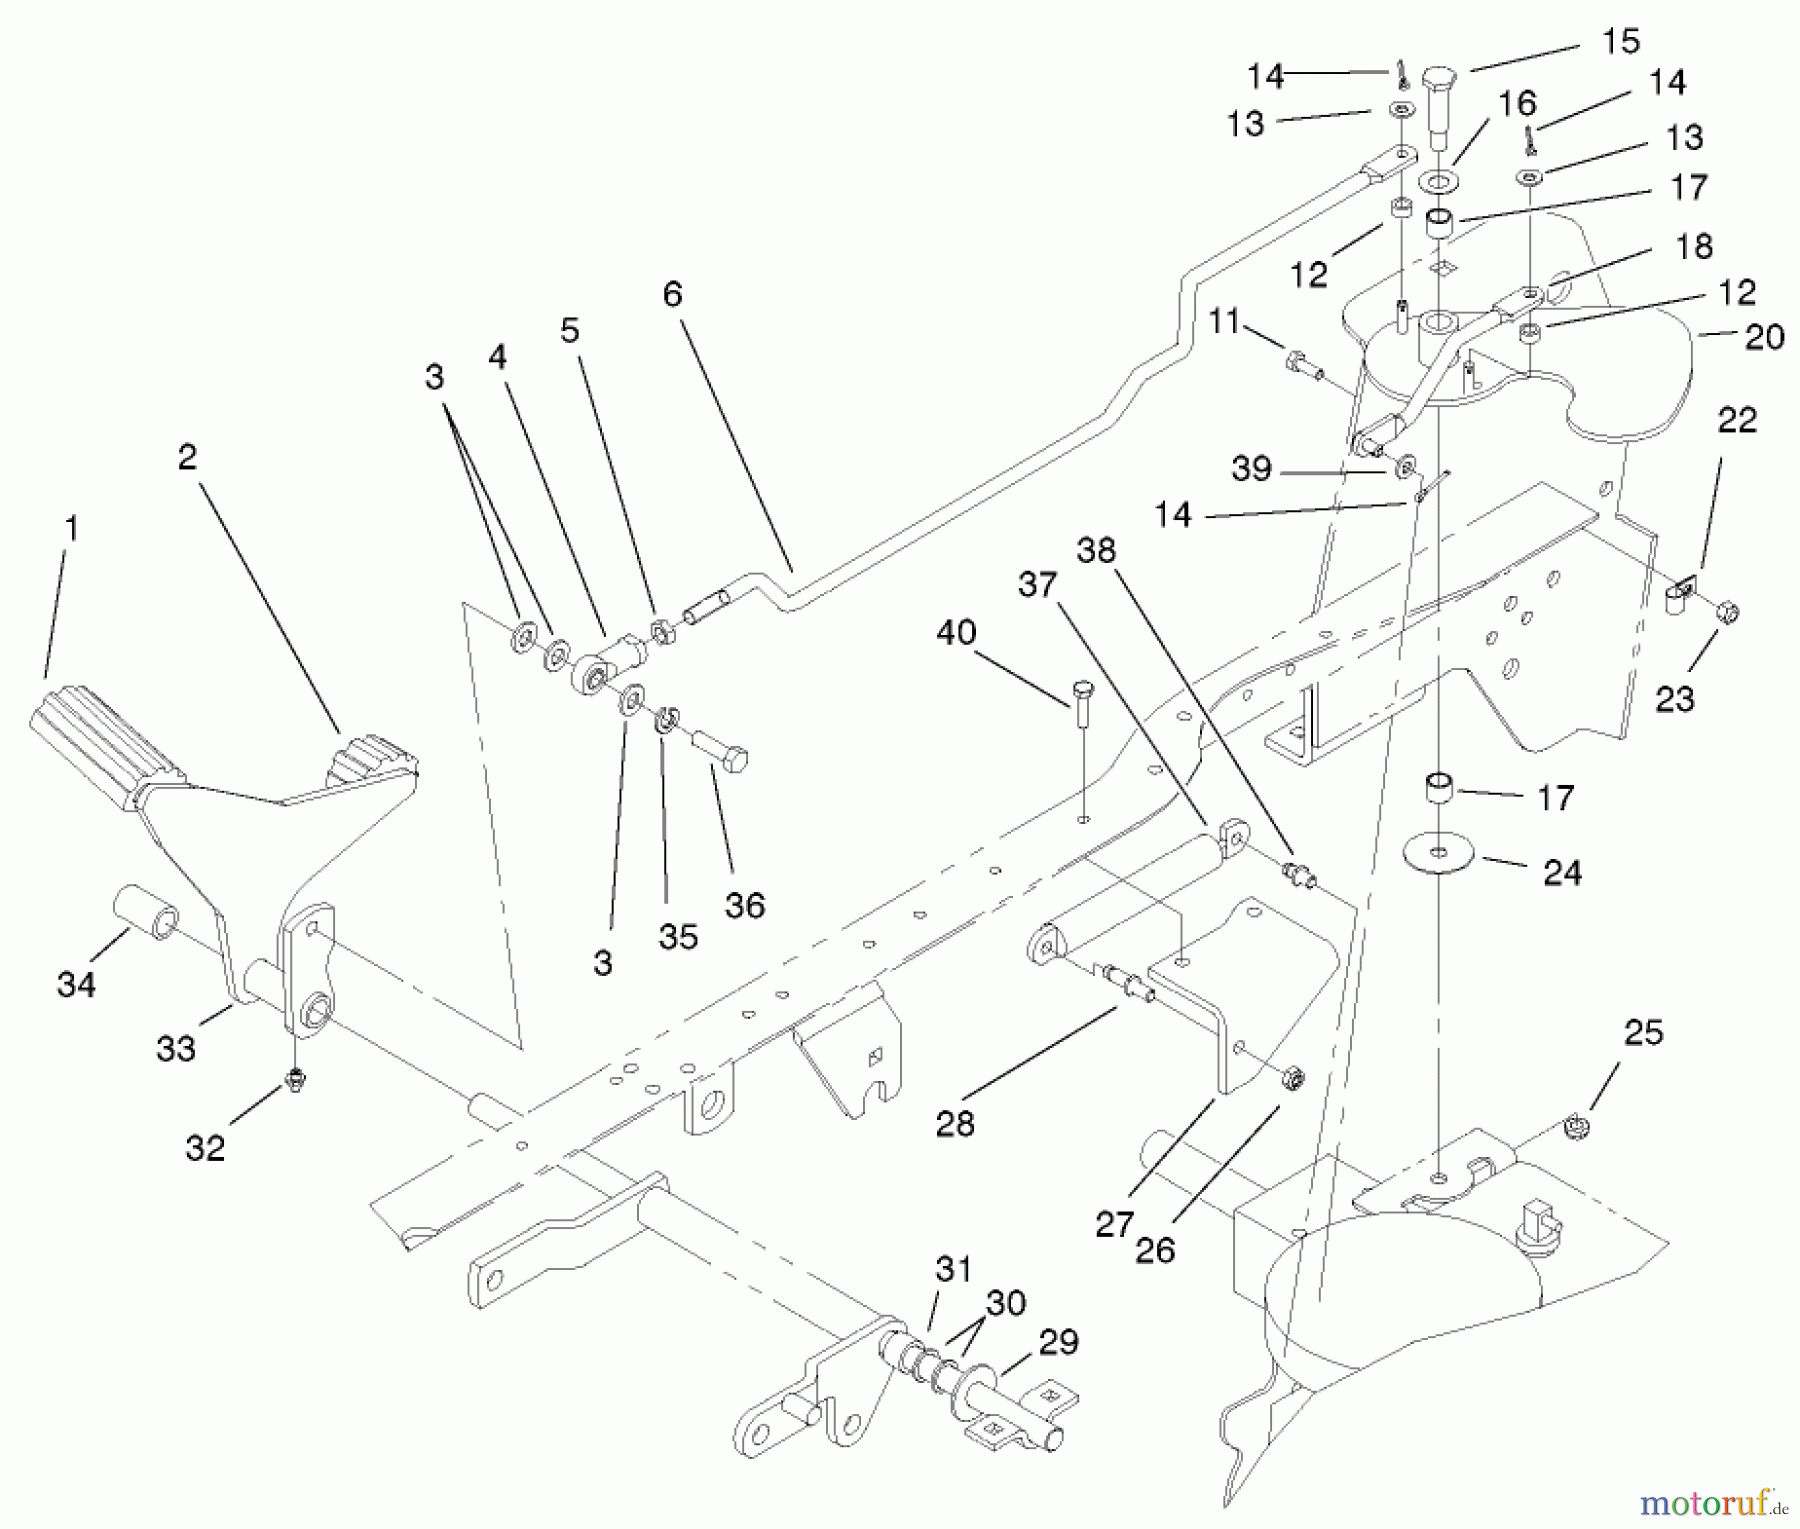  Toro Neu Mowers, Lawn & Garden Tractor Seite 1 72051 (265-H) - Toro 265-H Lawn and Garden Tractor, 2001 (210000001-210999999) HYDRAULIC CONTROLS ASSEMBLY